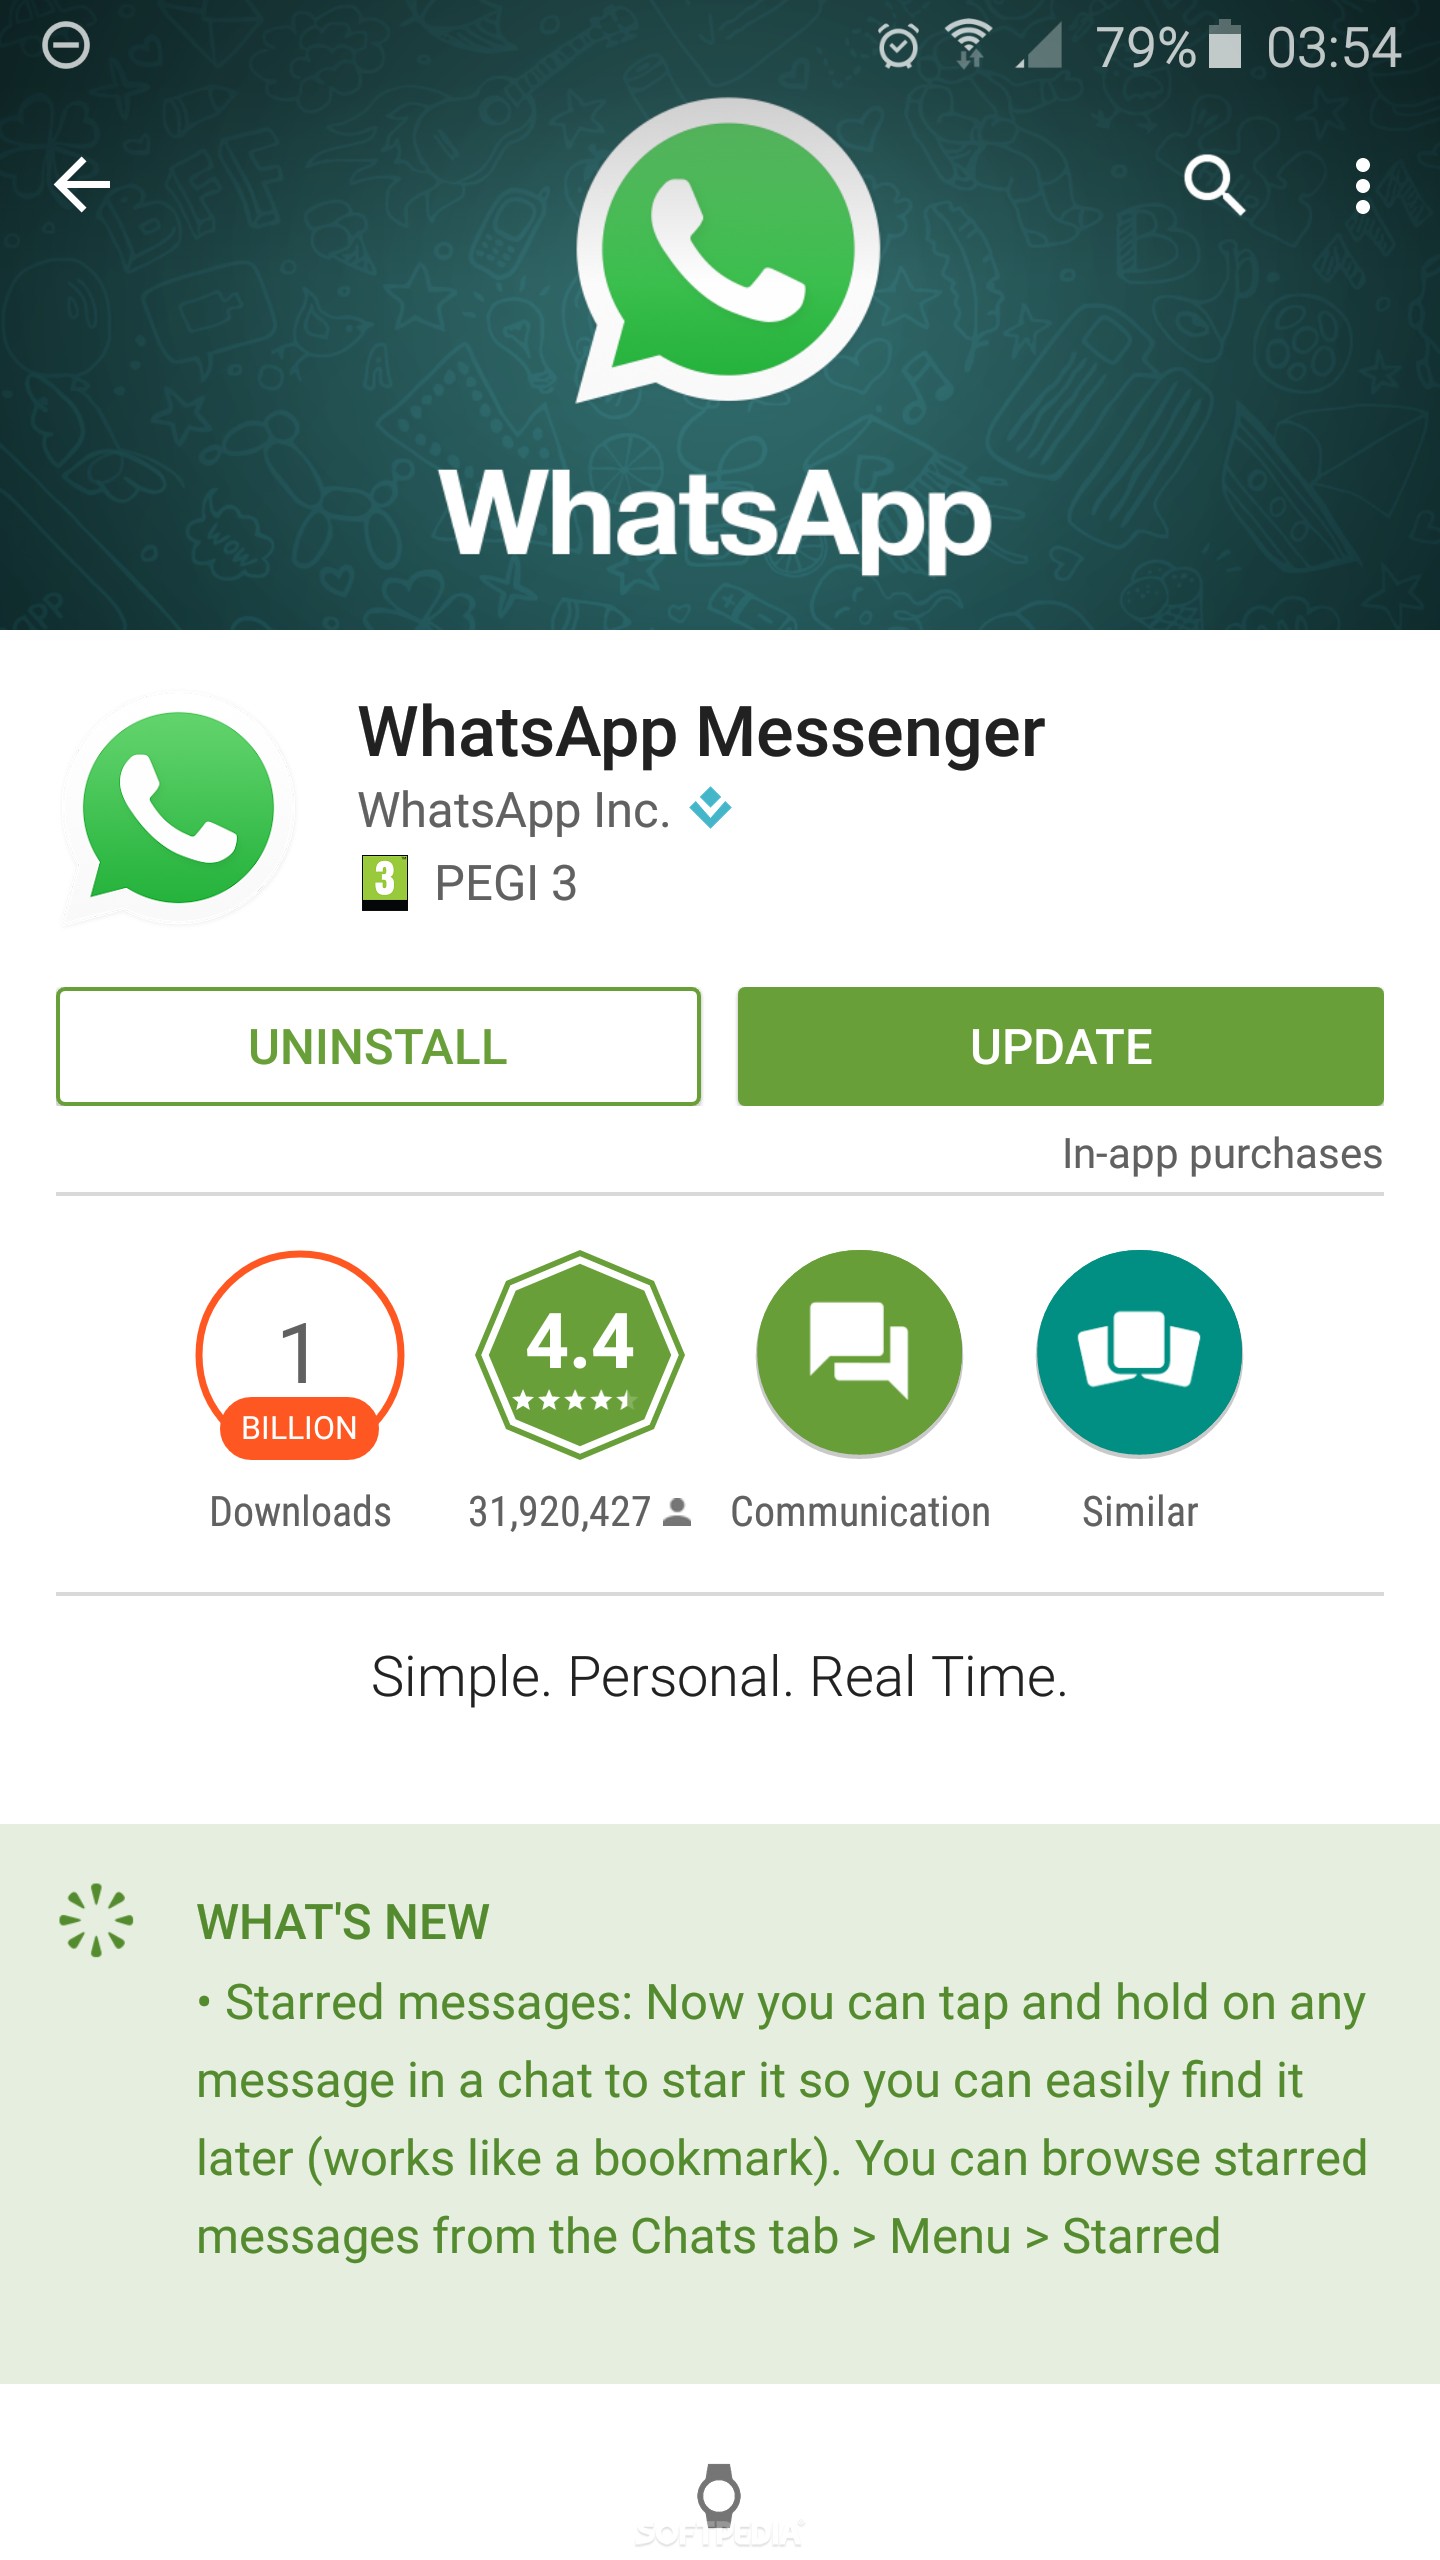 whatsapp for android receives update that adds starred